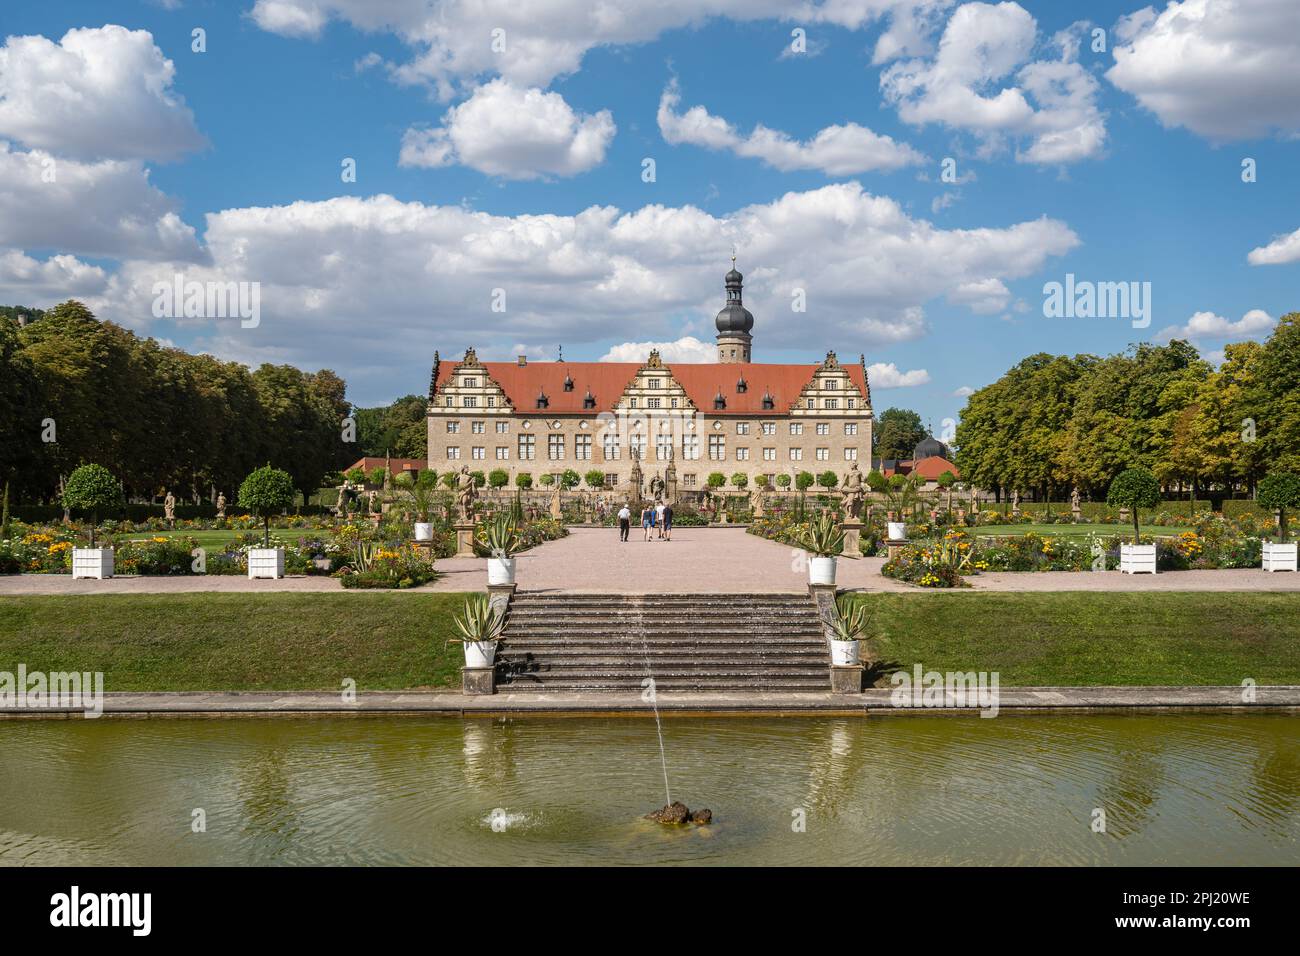 View of Weikersheim Palace (Schloss Weikersheim), surrounded by a beautiful park and located on the famous Romantic Road, Germany Stock Photo